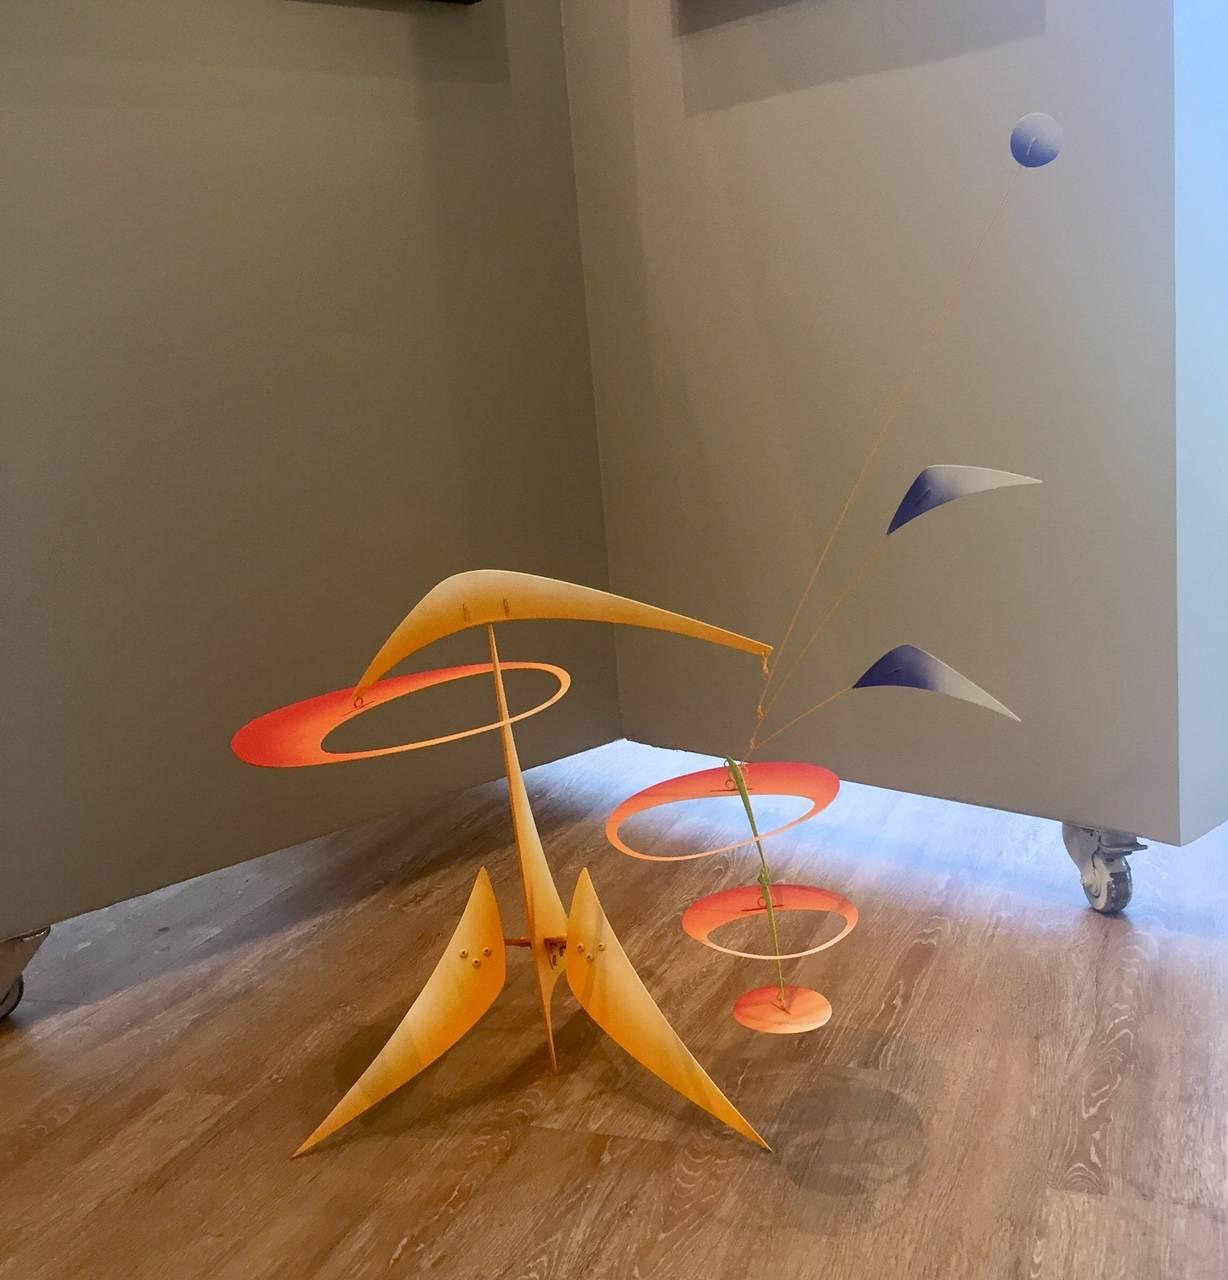 Vivid lightweight steel and aluminum table top sculpture / stabile-mobile. The work comes in two parts that fit together - tongue in groove and balances perfectly. Moves with the slightest breeze or gentle touch. Artist signed in the steel on both